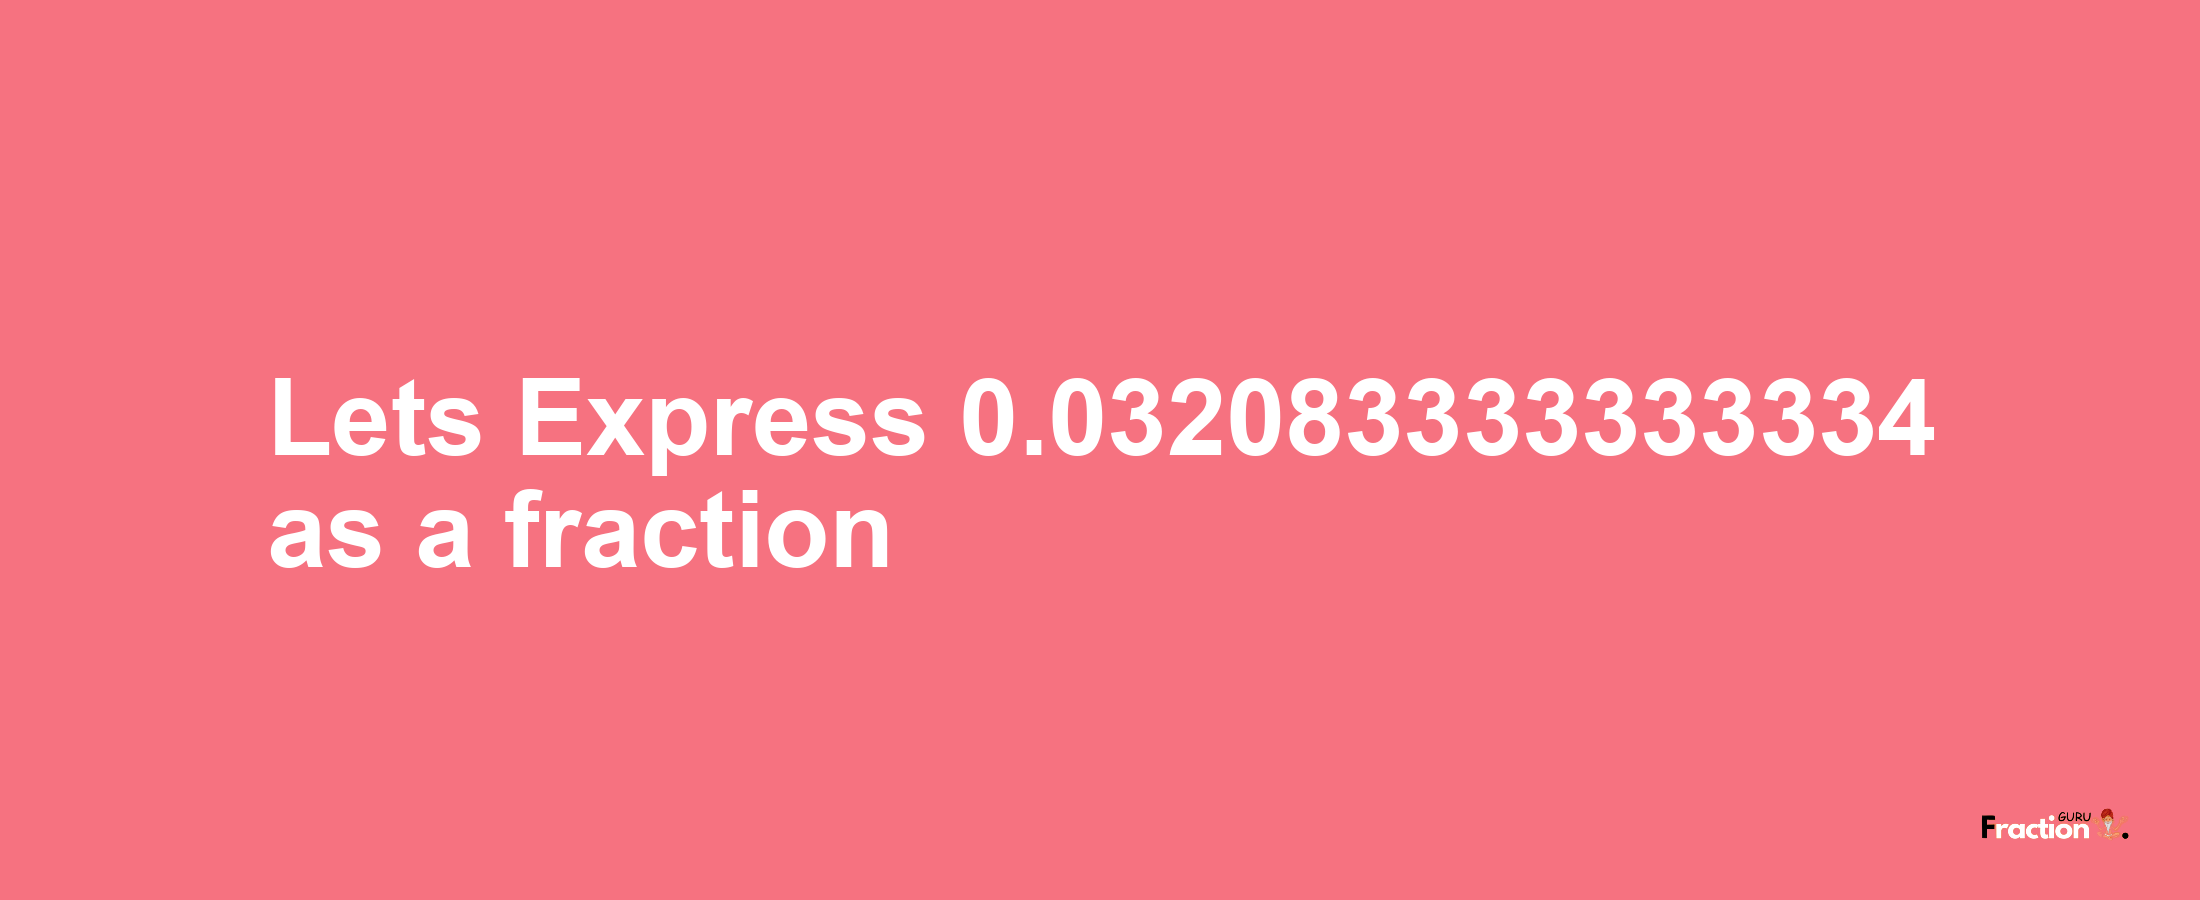 Lets Express 0.032083333333334 as afraction